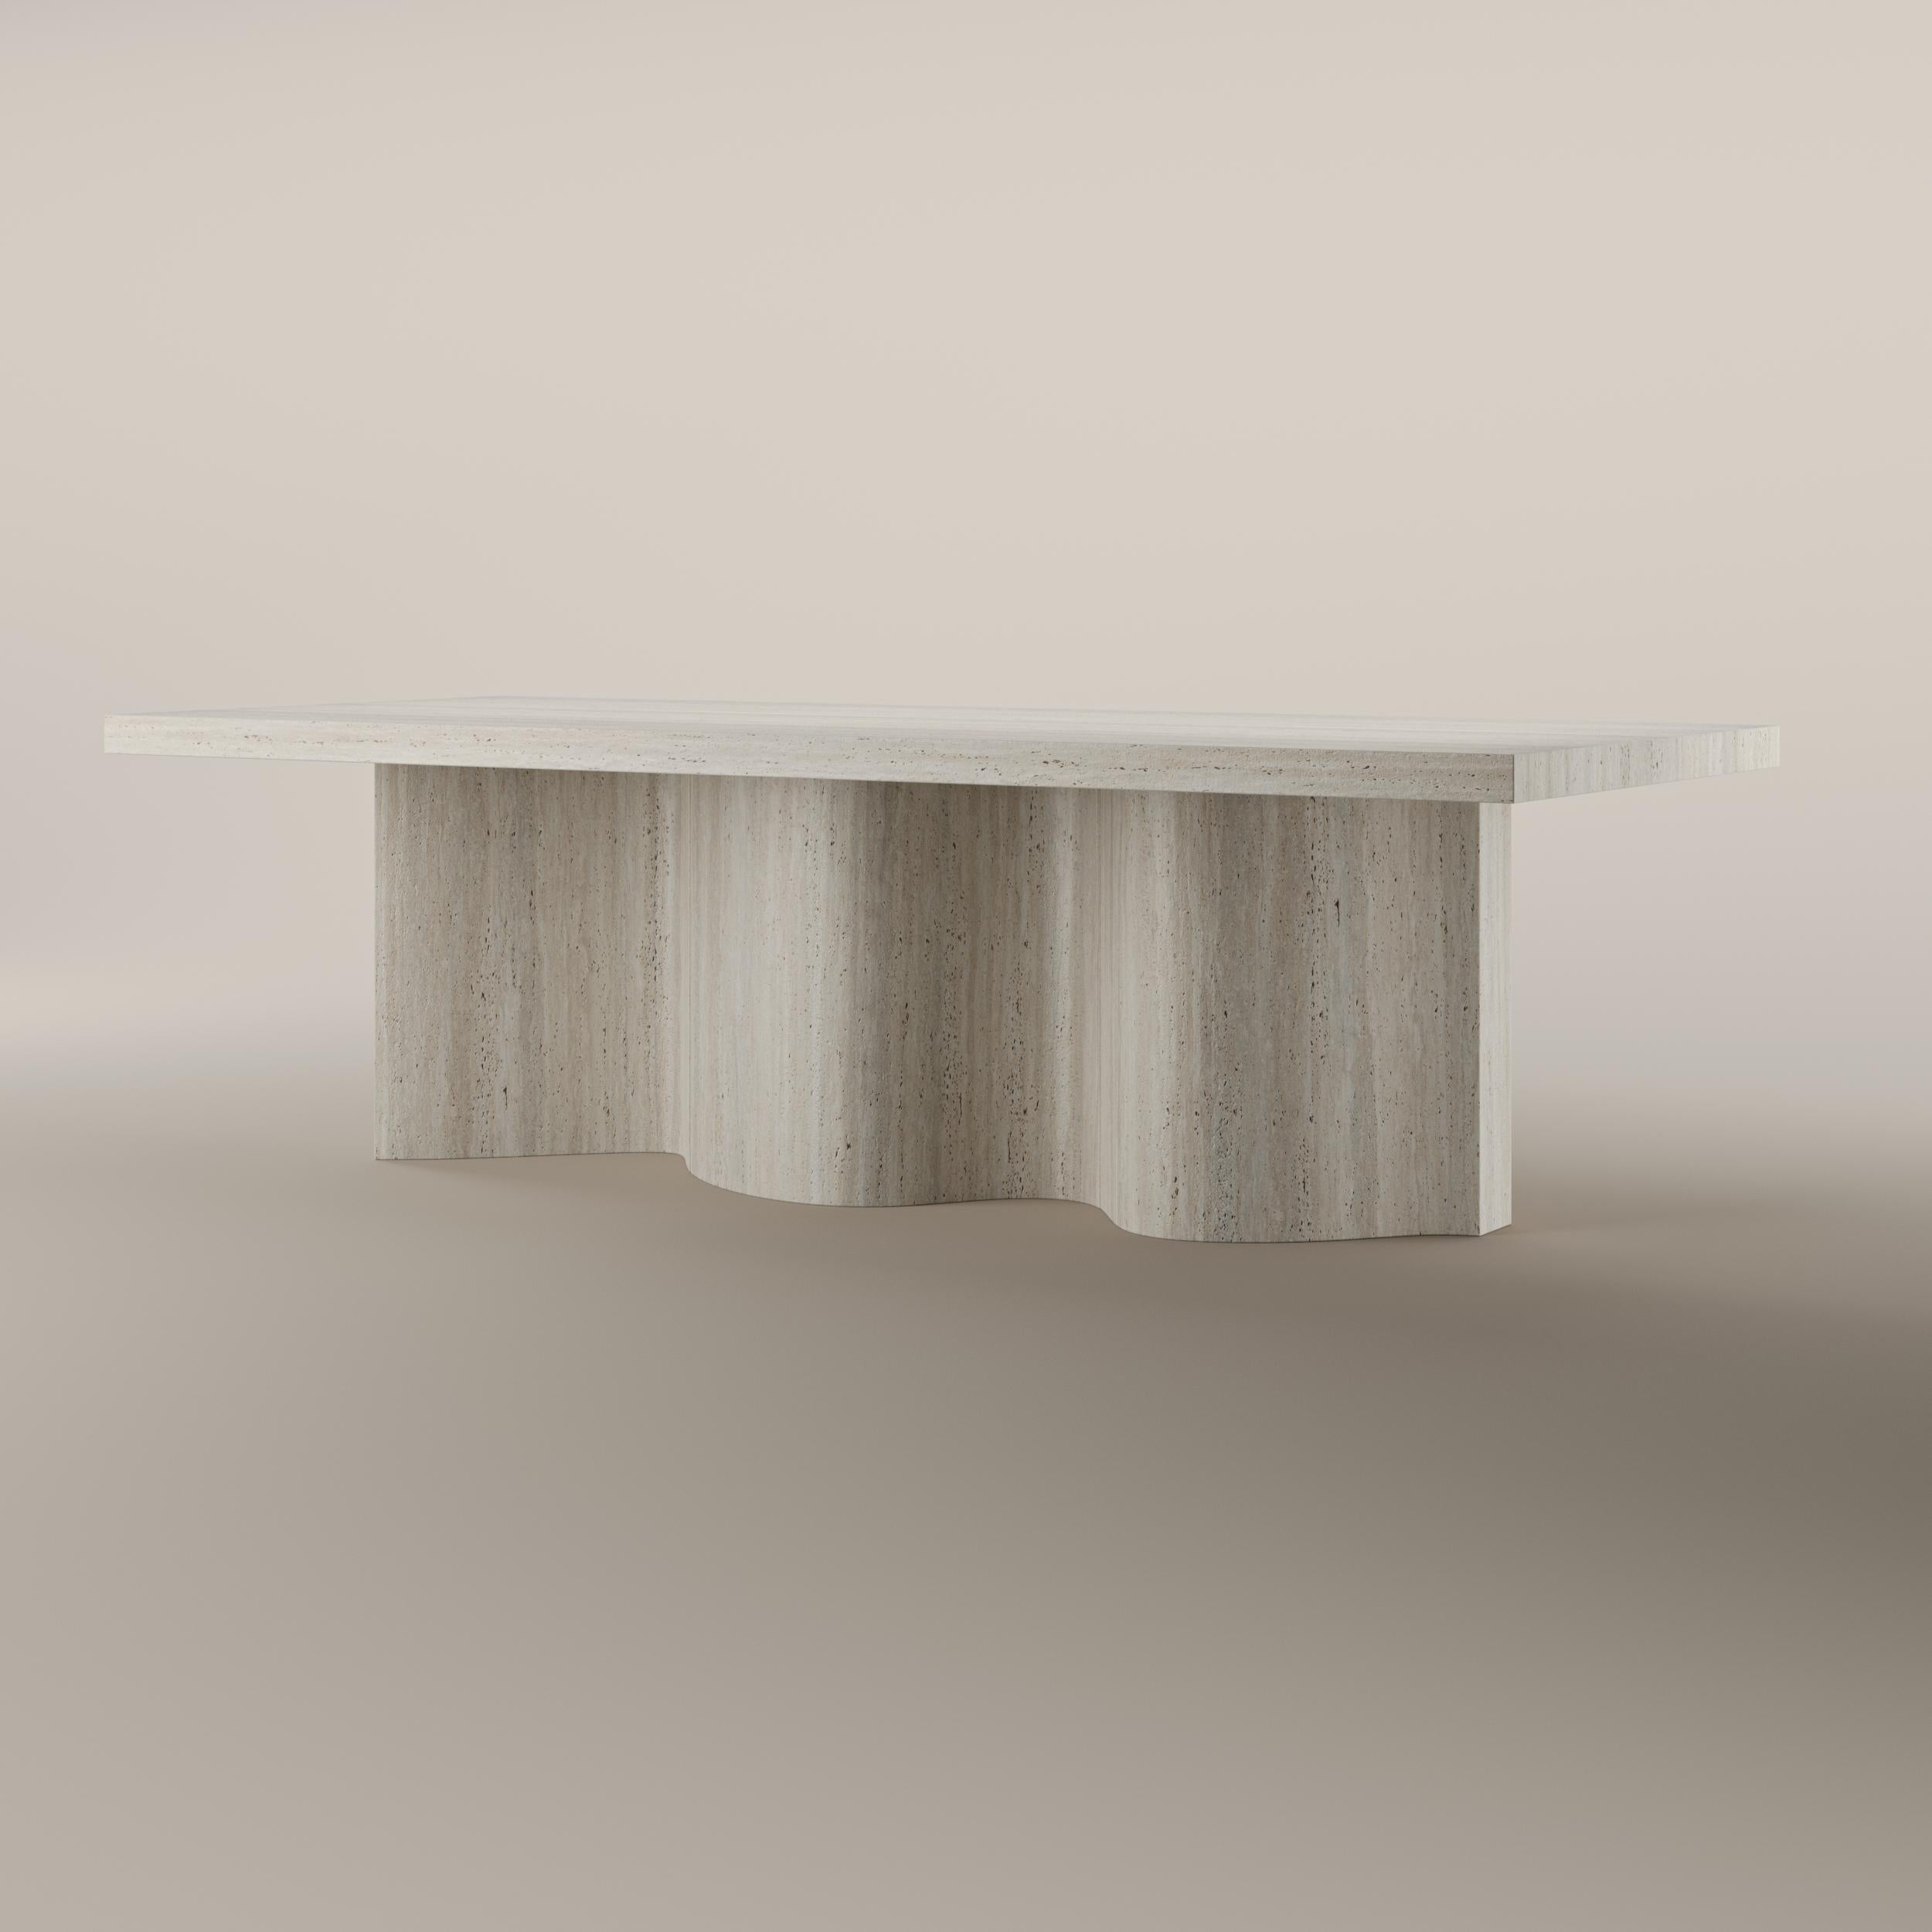 Made-to-order
Cadence Travertine
Dining table by T. Woon

The exquisite travertine dining table is indeed a manifestation of the designer's pristine aesthetics. Meticulously handcrafted by skilled artisans with top-quality materials, it showcases